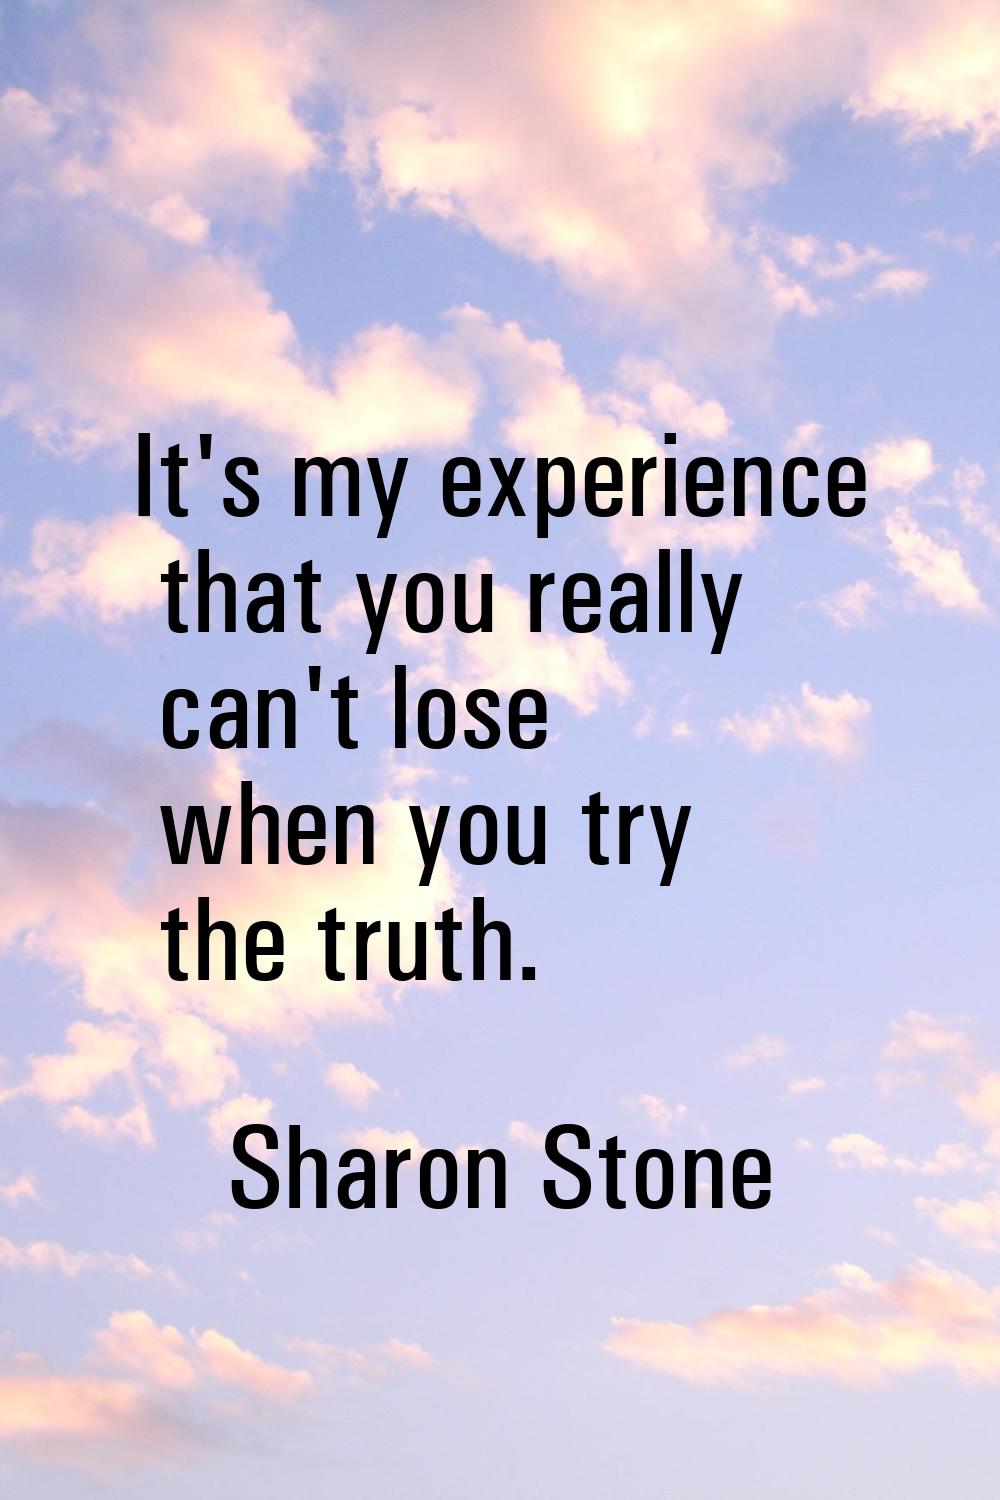 It's my experience that you really can't lose when you try the truth.